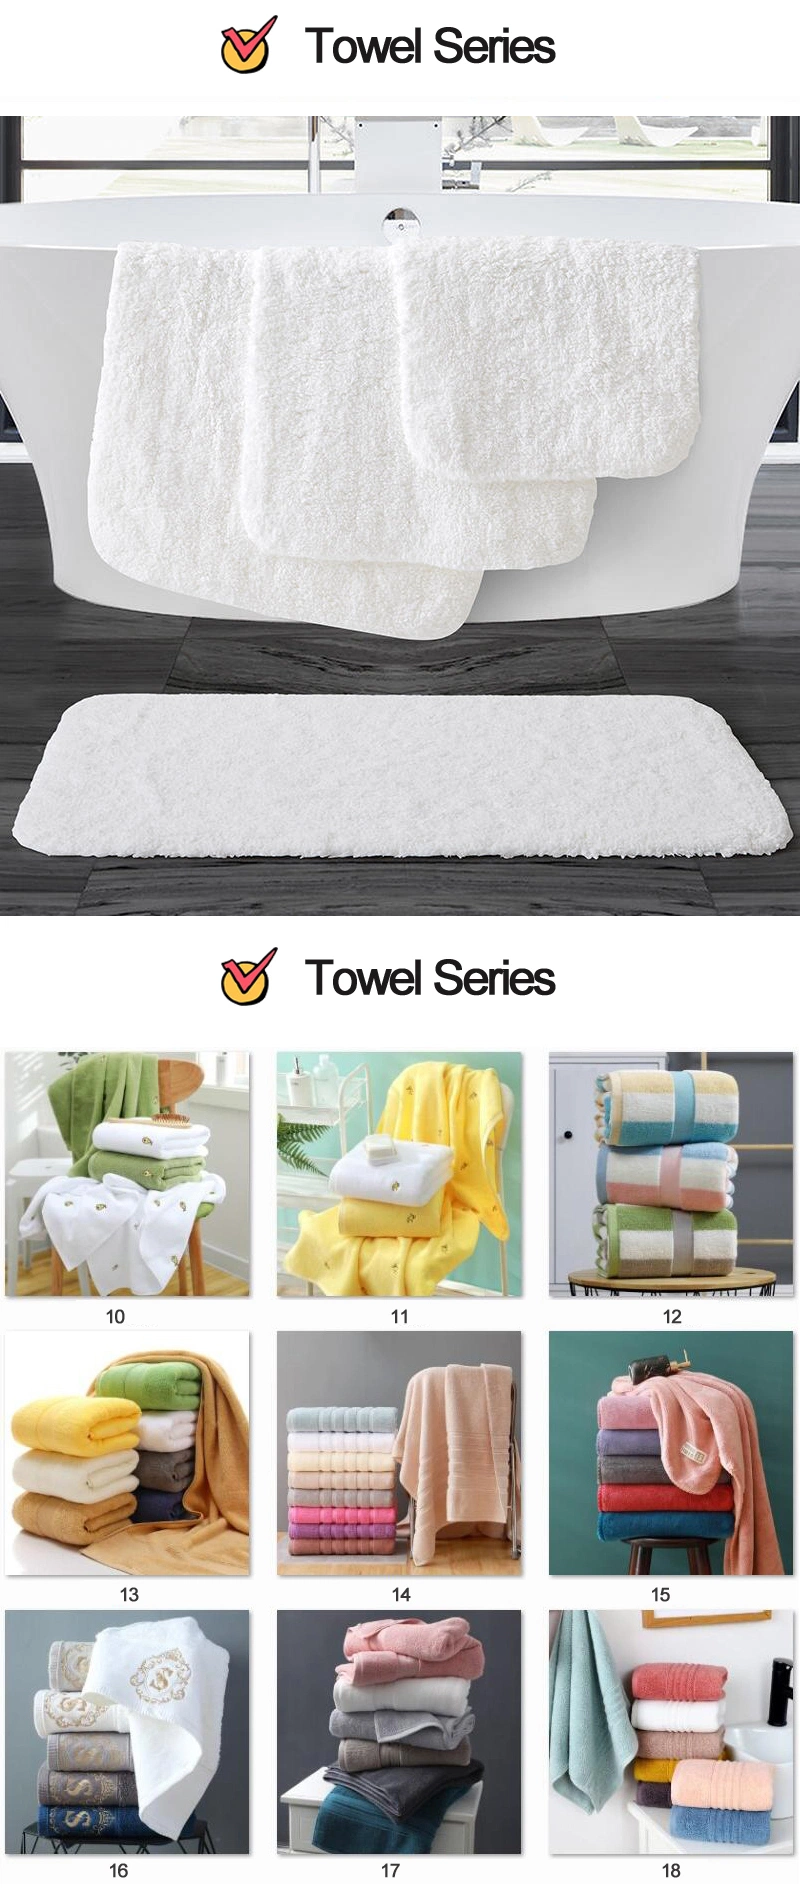 Hotel Supply Bath Mat Panel Non-Slip Thick Shaggy 100% China Cotton White 20 X 31 Inch for Hotel